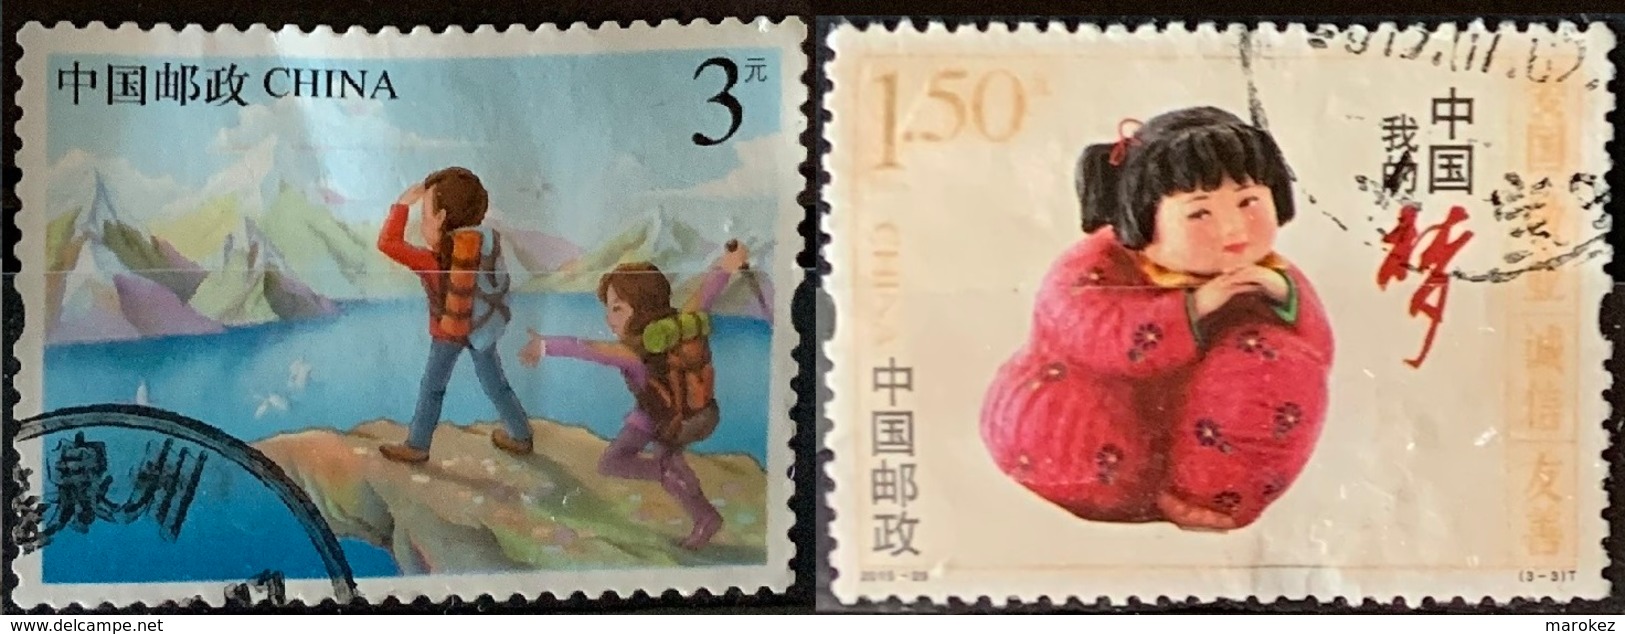 CHINA PRC 2015 Tourism & Nationalist Values 2 Postally Used Stamps MICHEL # 4677,4783 - Gebraucht